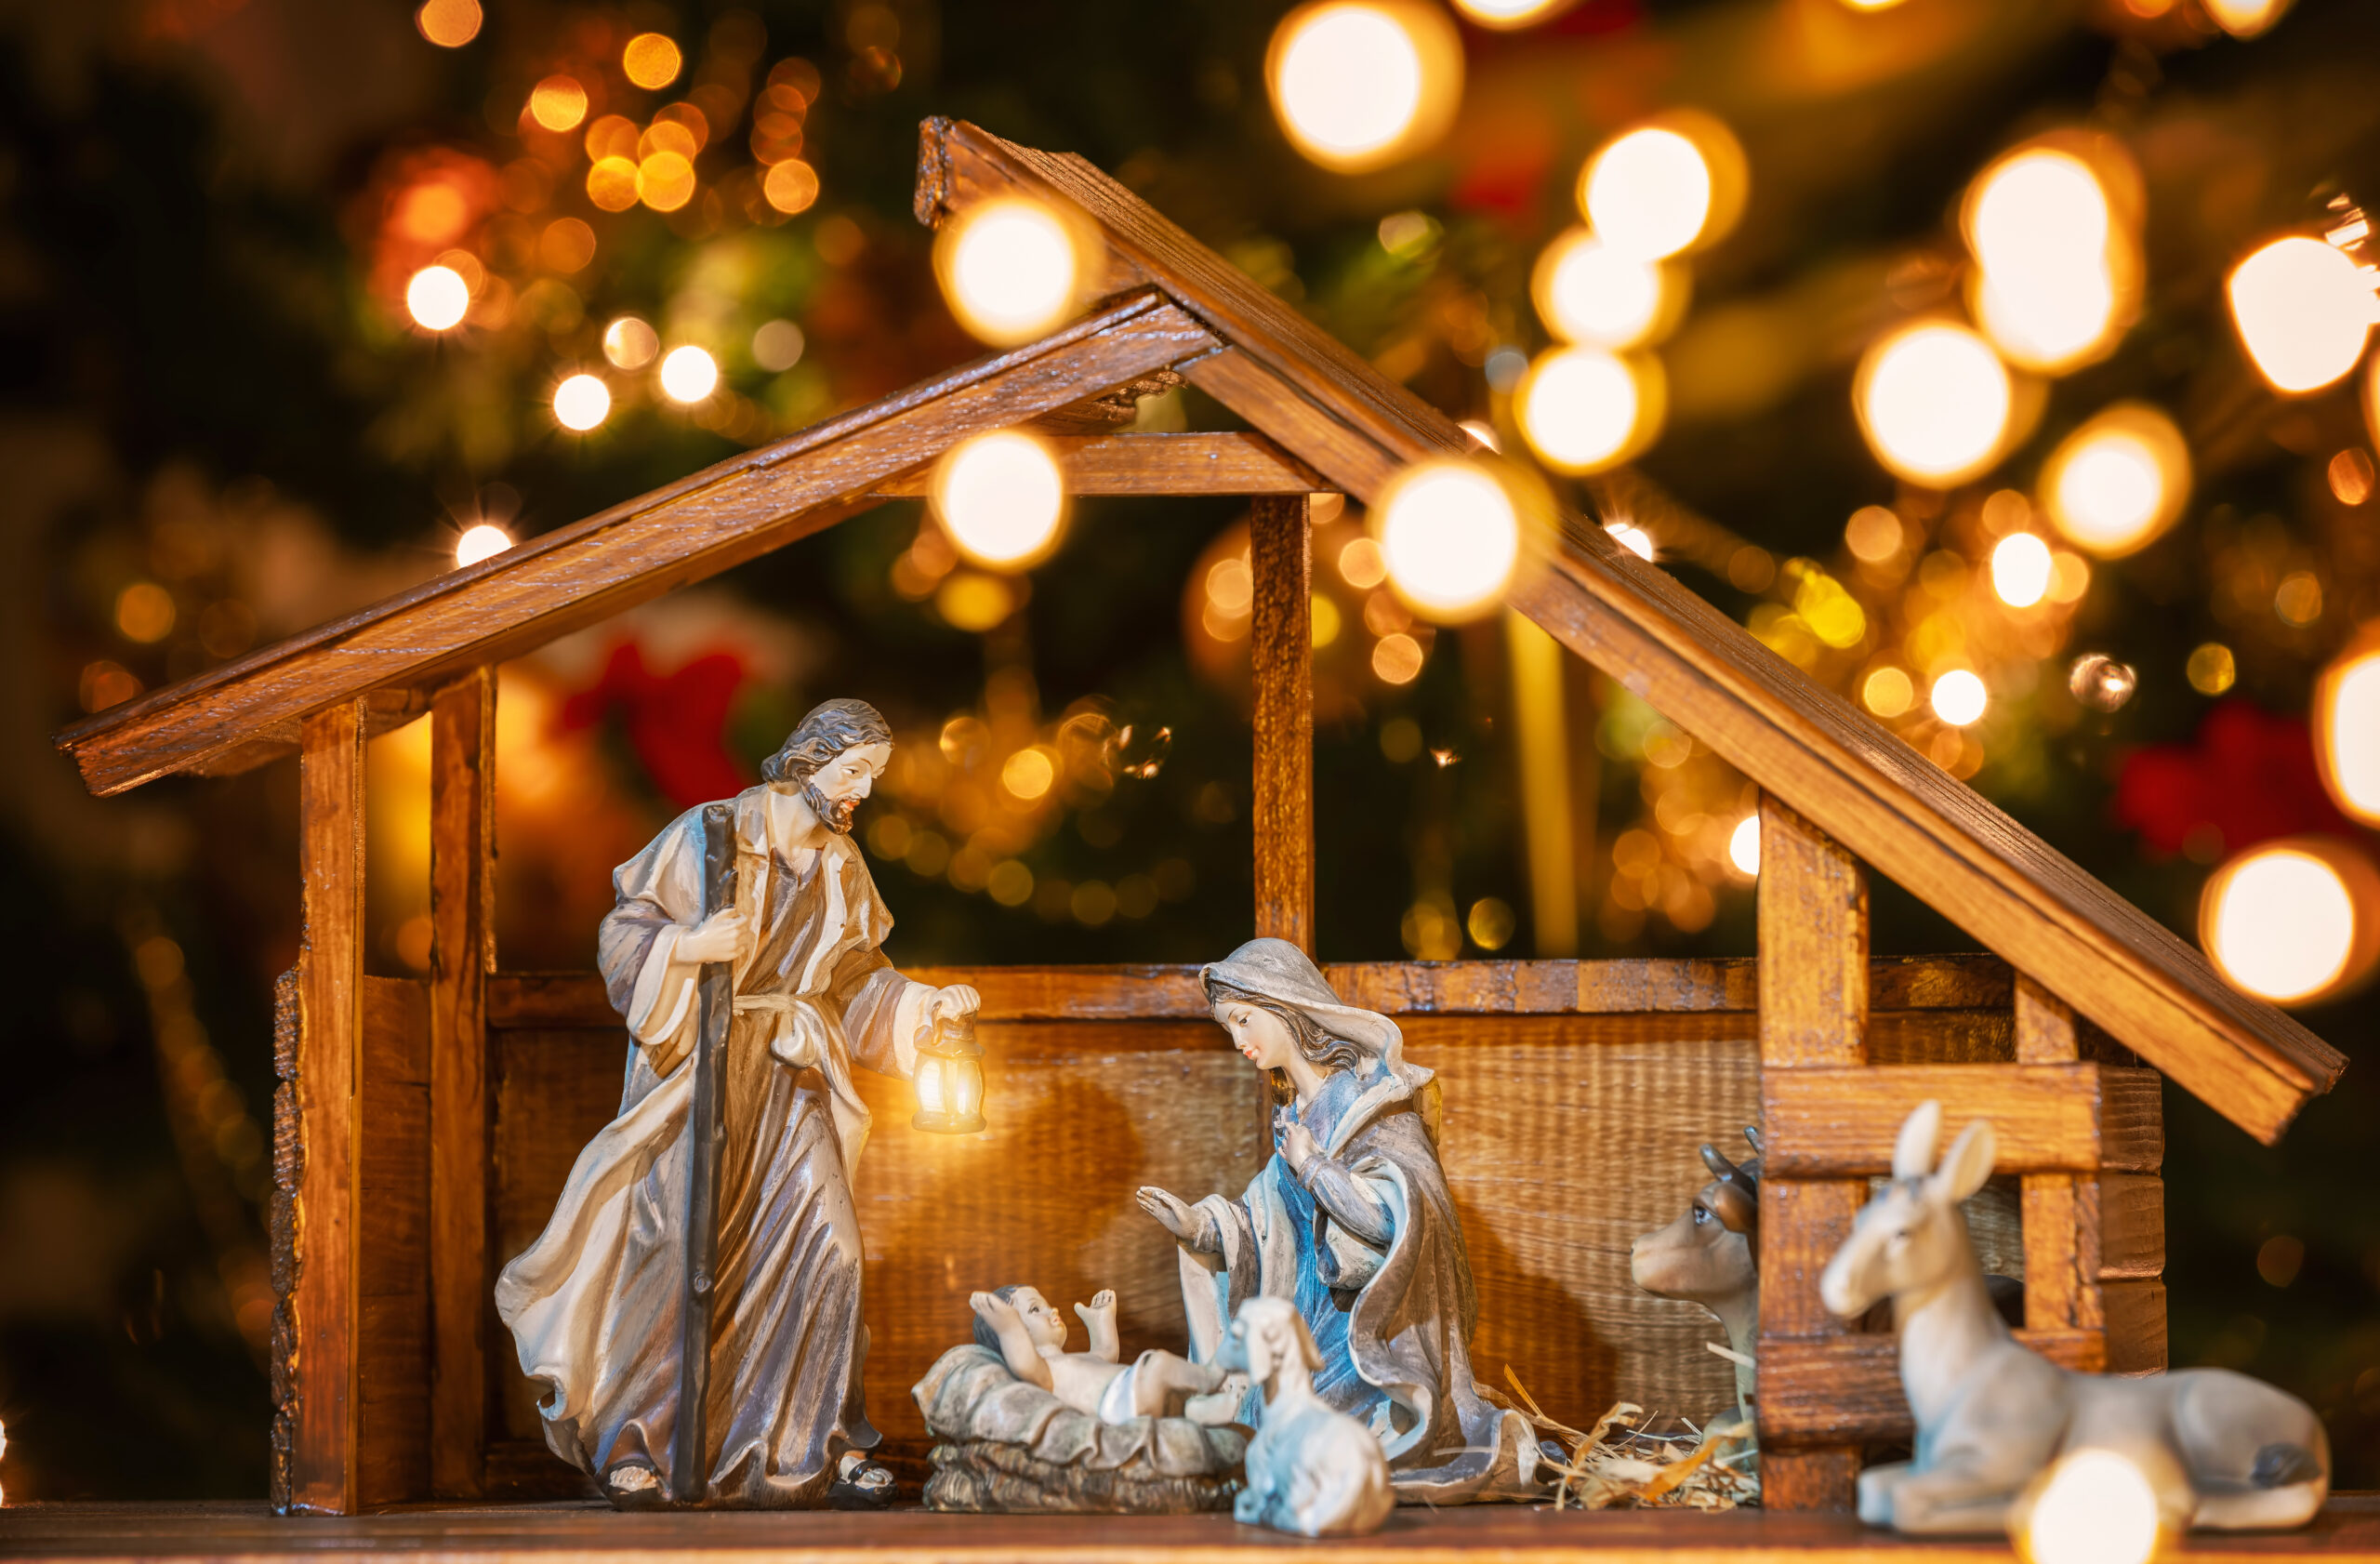 A wooden nativity scene featuring figurines of Joseph holding a lantern, Mary kneeling, baby Jesus in a manger, and animals. The background is adorned with festive Christmas lights.